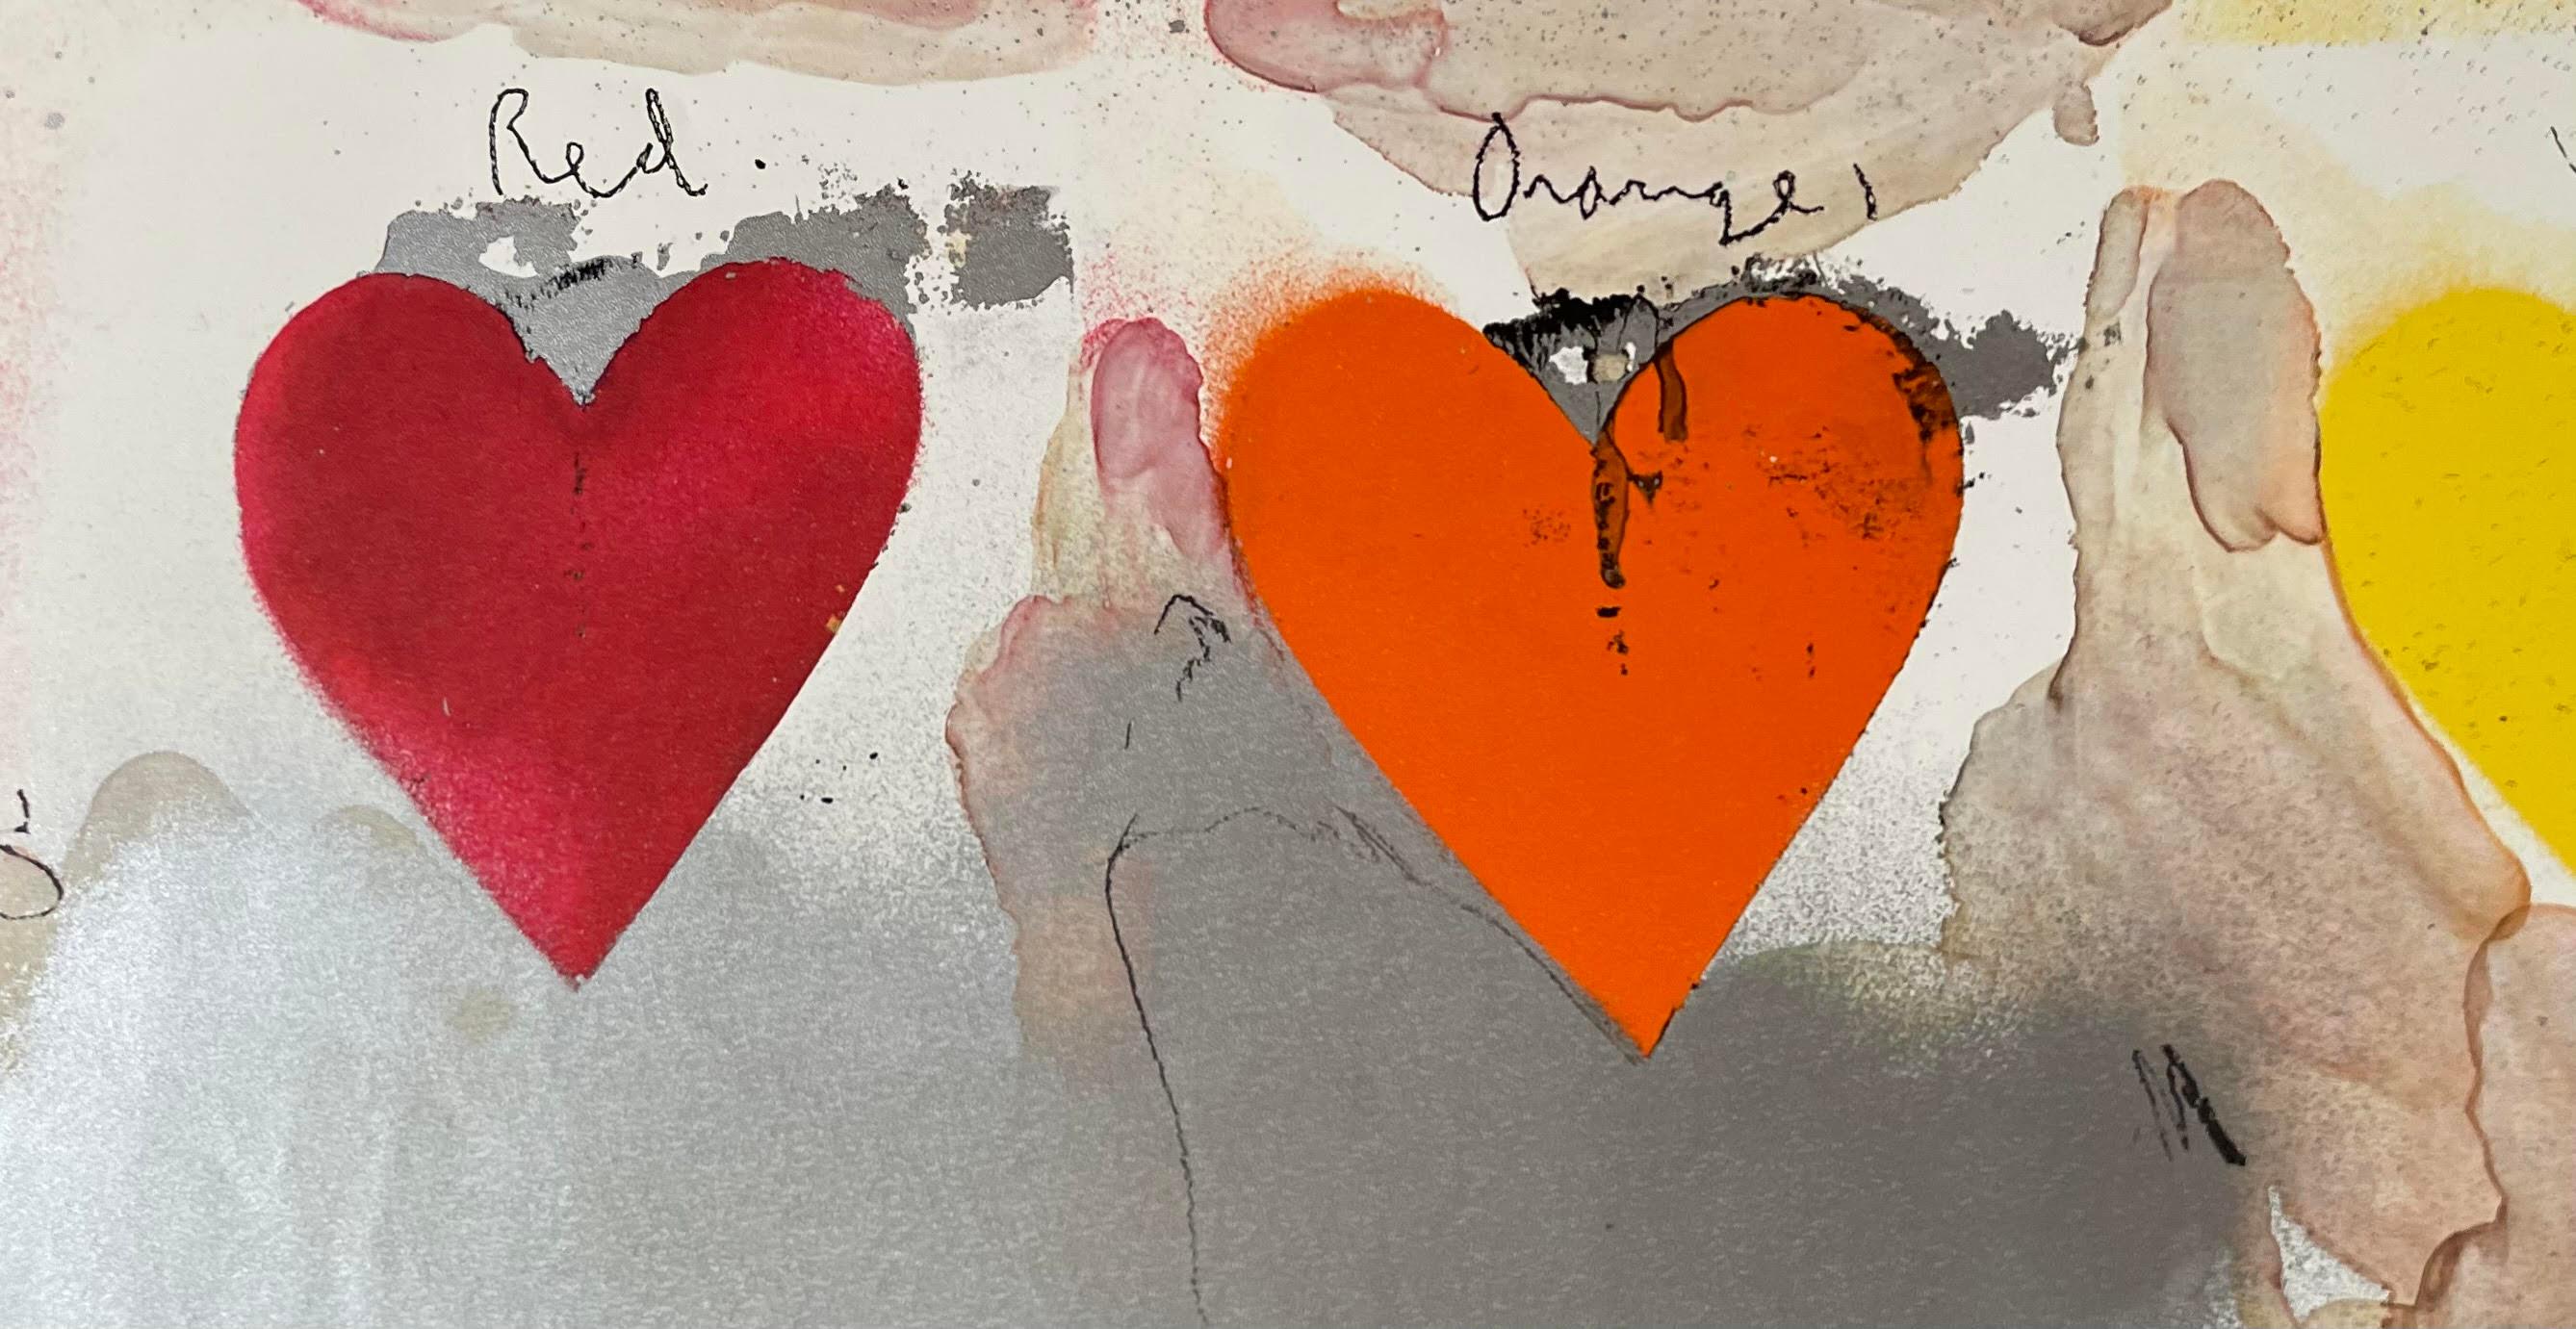 8 Hearts / Look, Lt. Ed Off-set Lithograph with metallic paper collage overlay - Print by Jim Dine